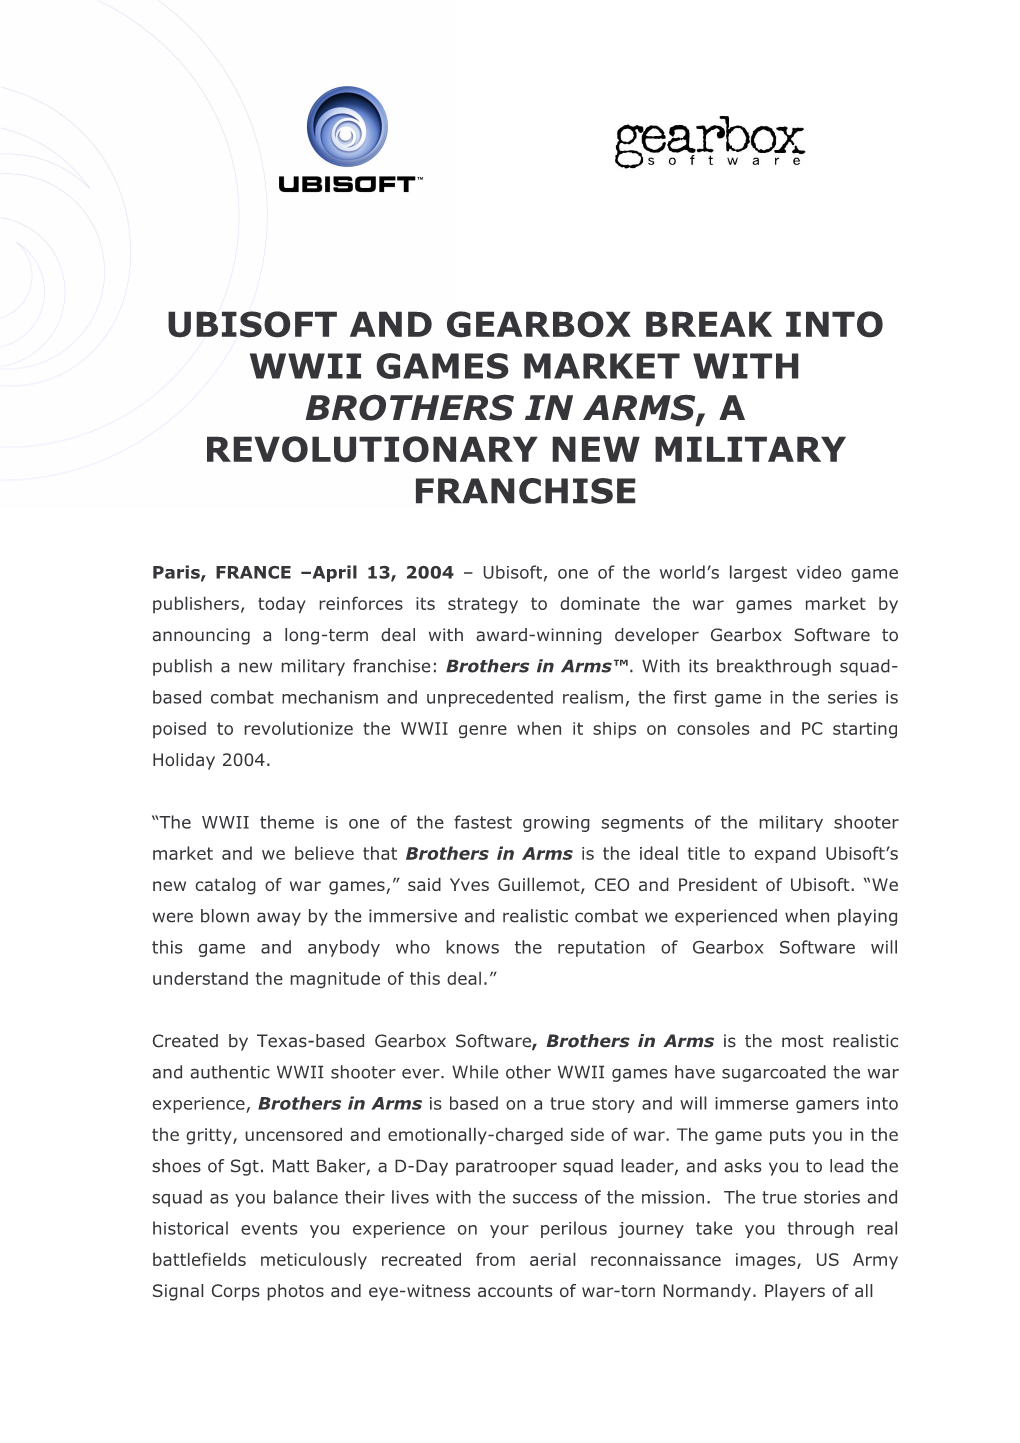 Ubisoft and Gearbox Break Into Wwii Games Market with Brothers in Arms , a Revolutionary New Military Franchise